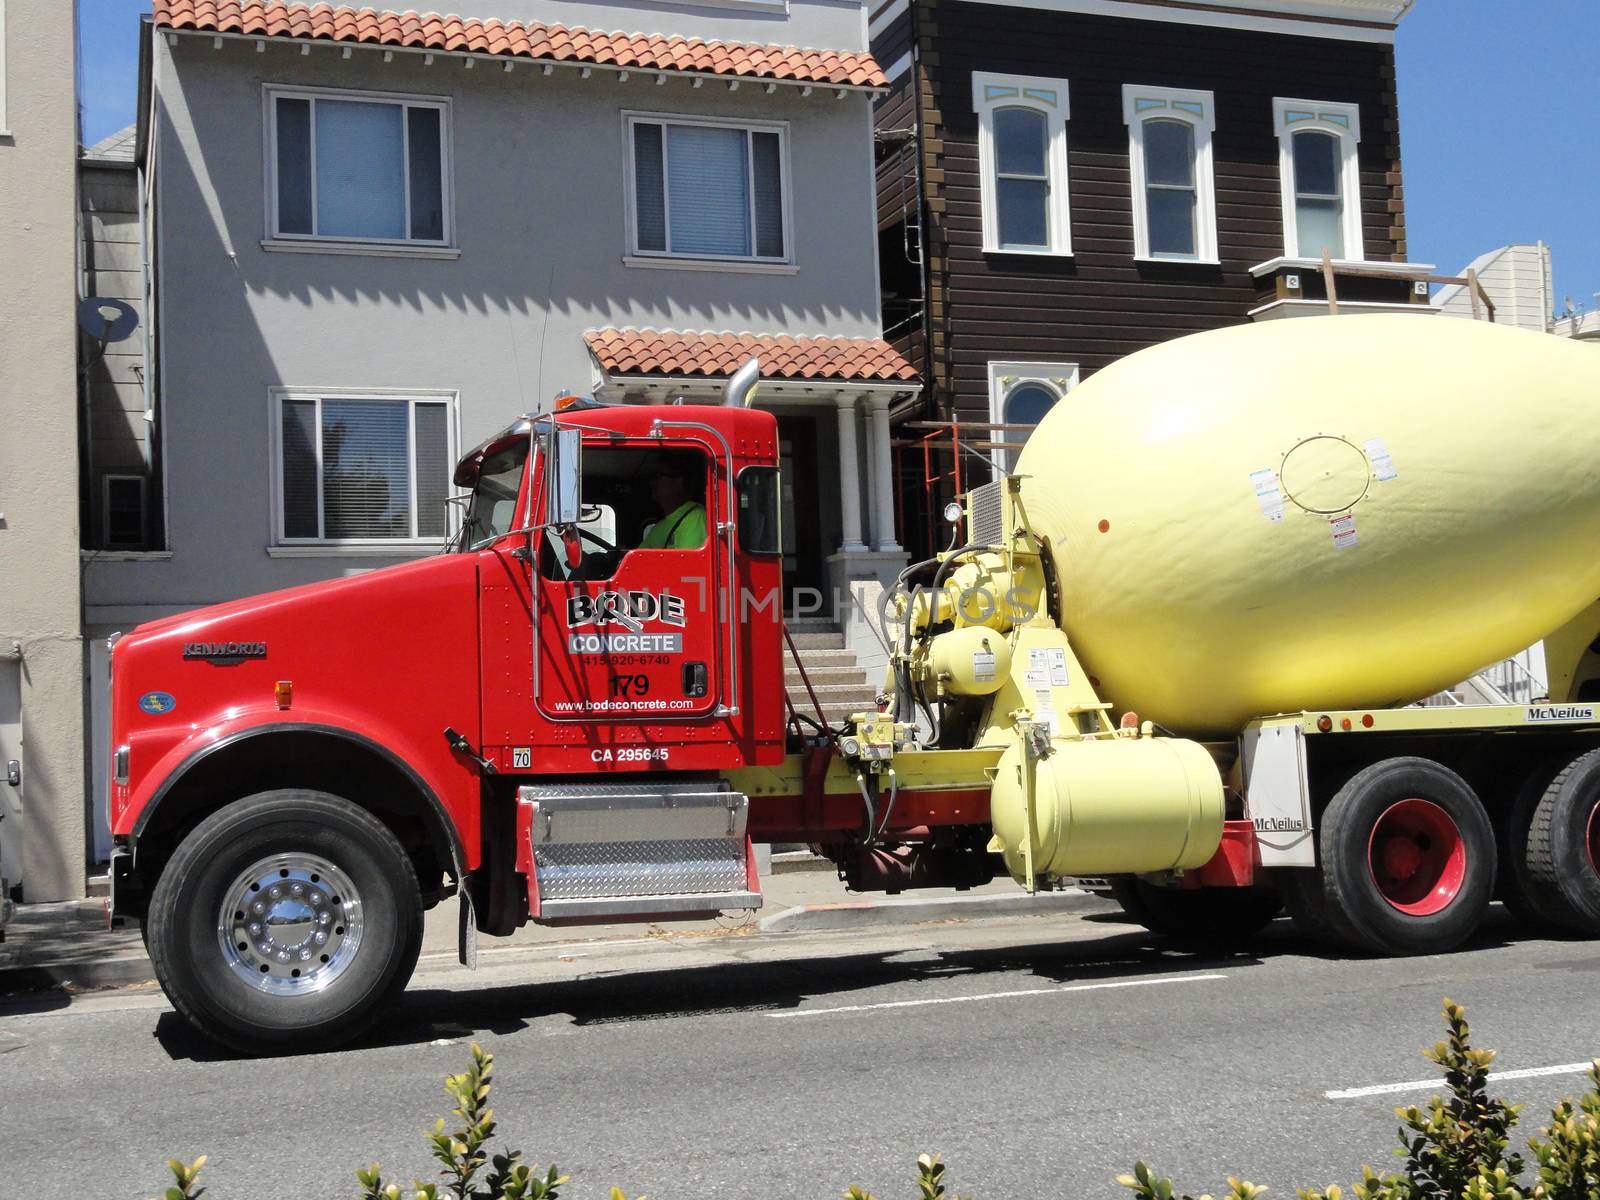 San Francisco, USA - July 22 2010: Red Kenworth Concrete Mixer Truck in the streets of San Francisco, California